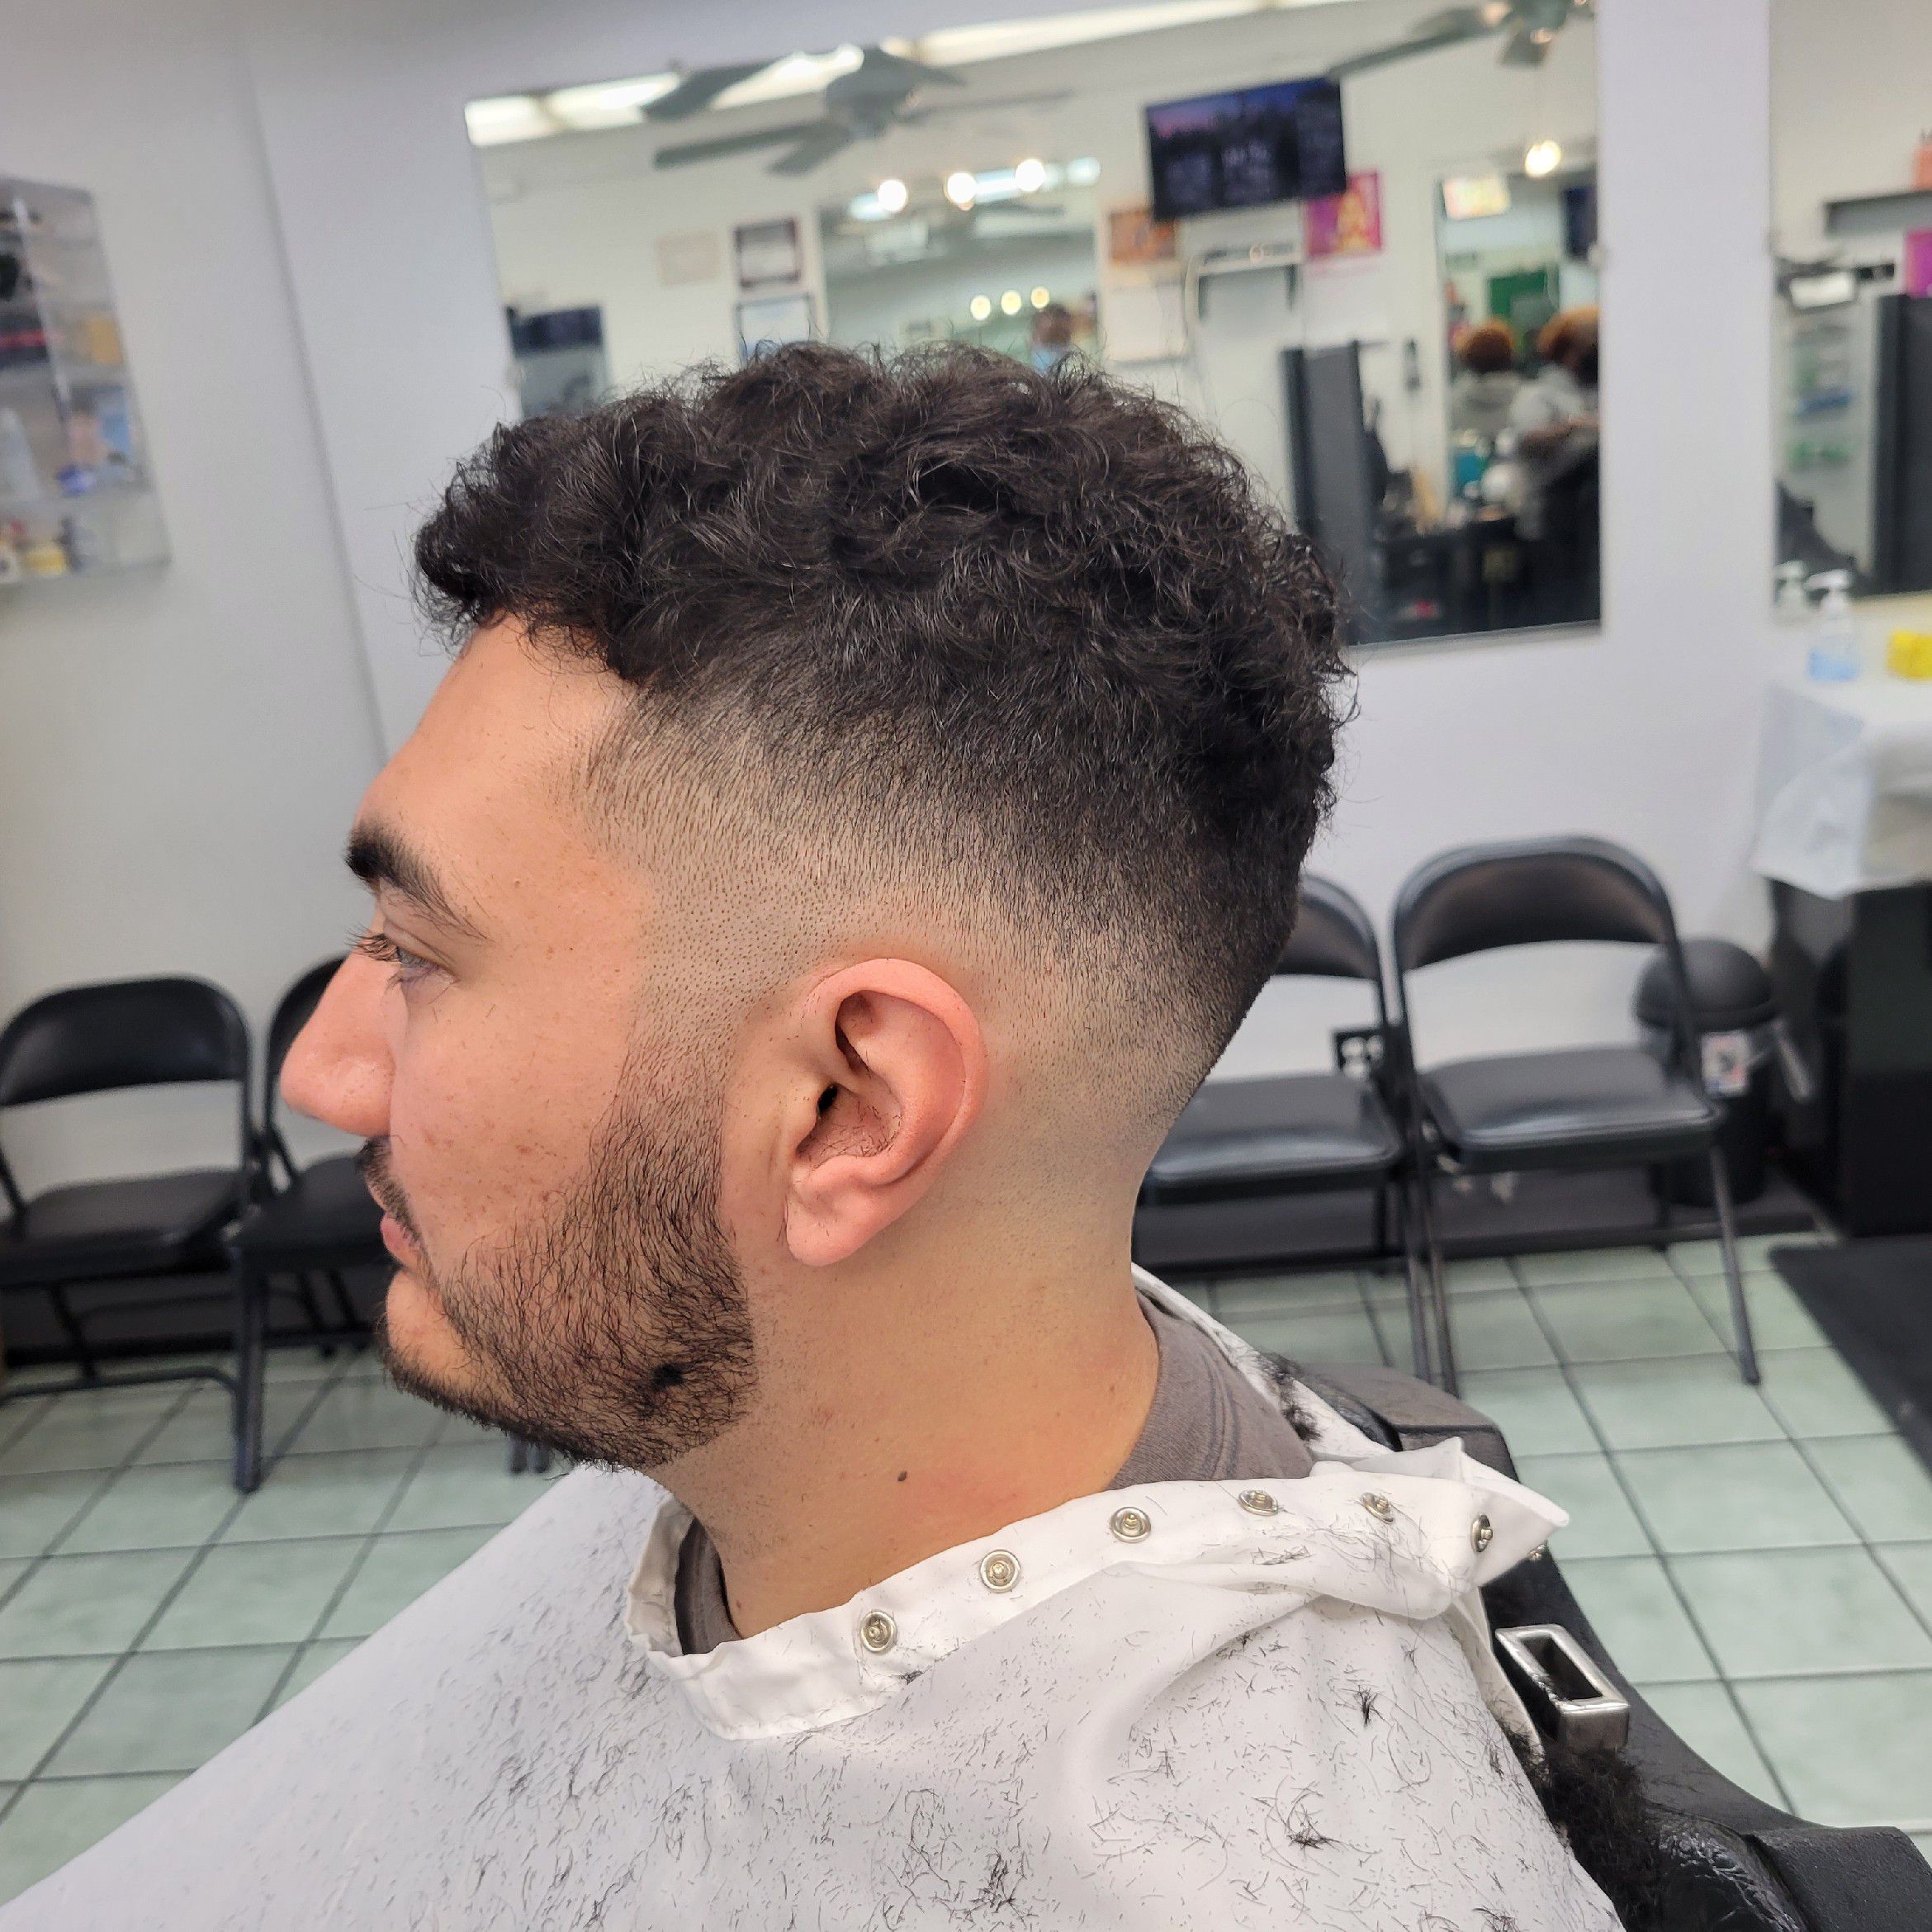 Haircuts, Level 7 or More (face not included) portfolio